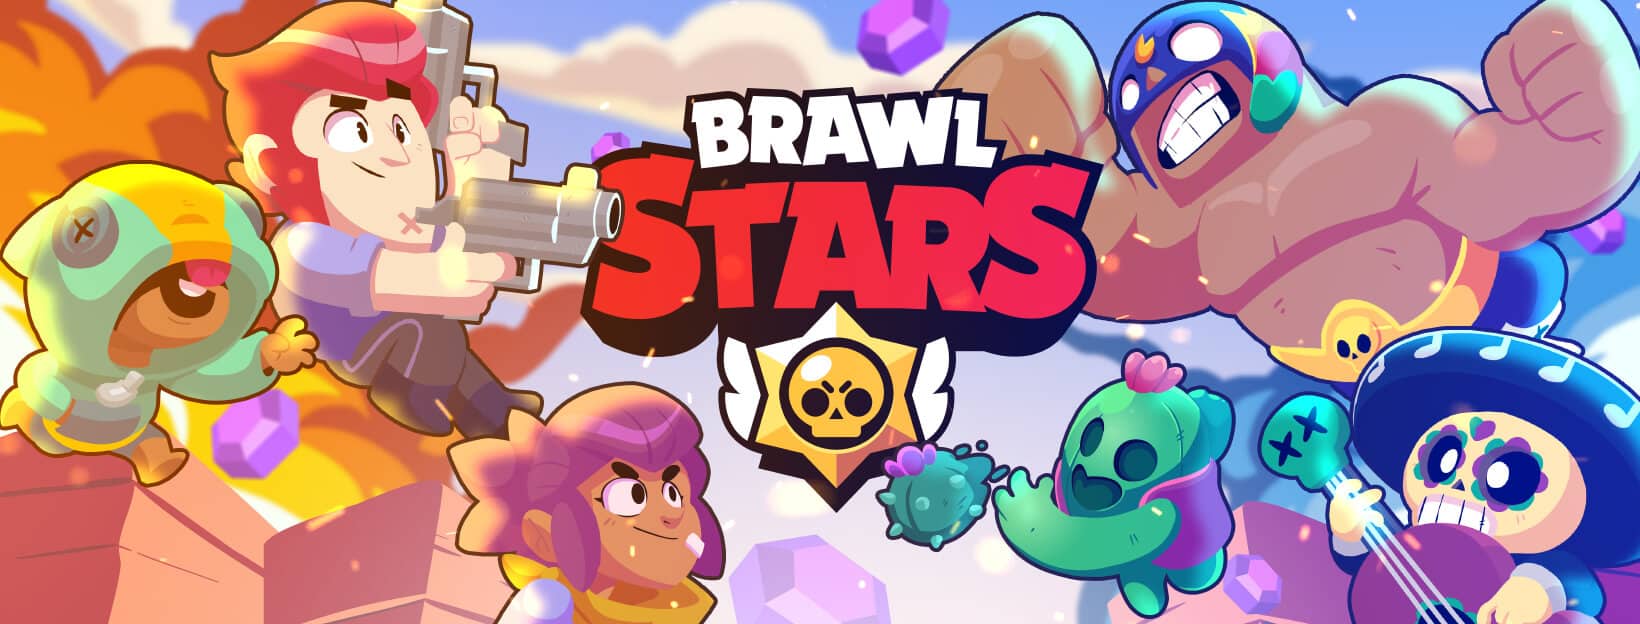 Parent S Guide Is Brawl Stars Safe For Your Kids - brawl stars join game room